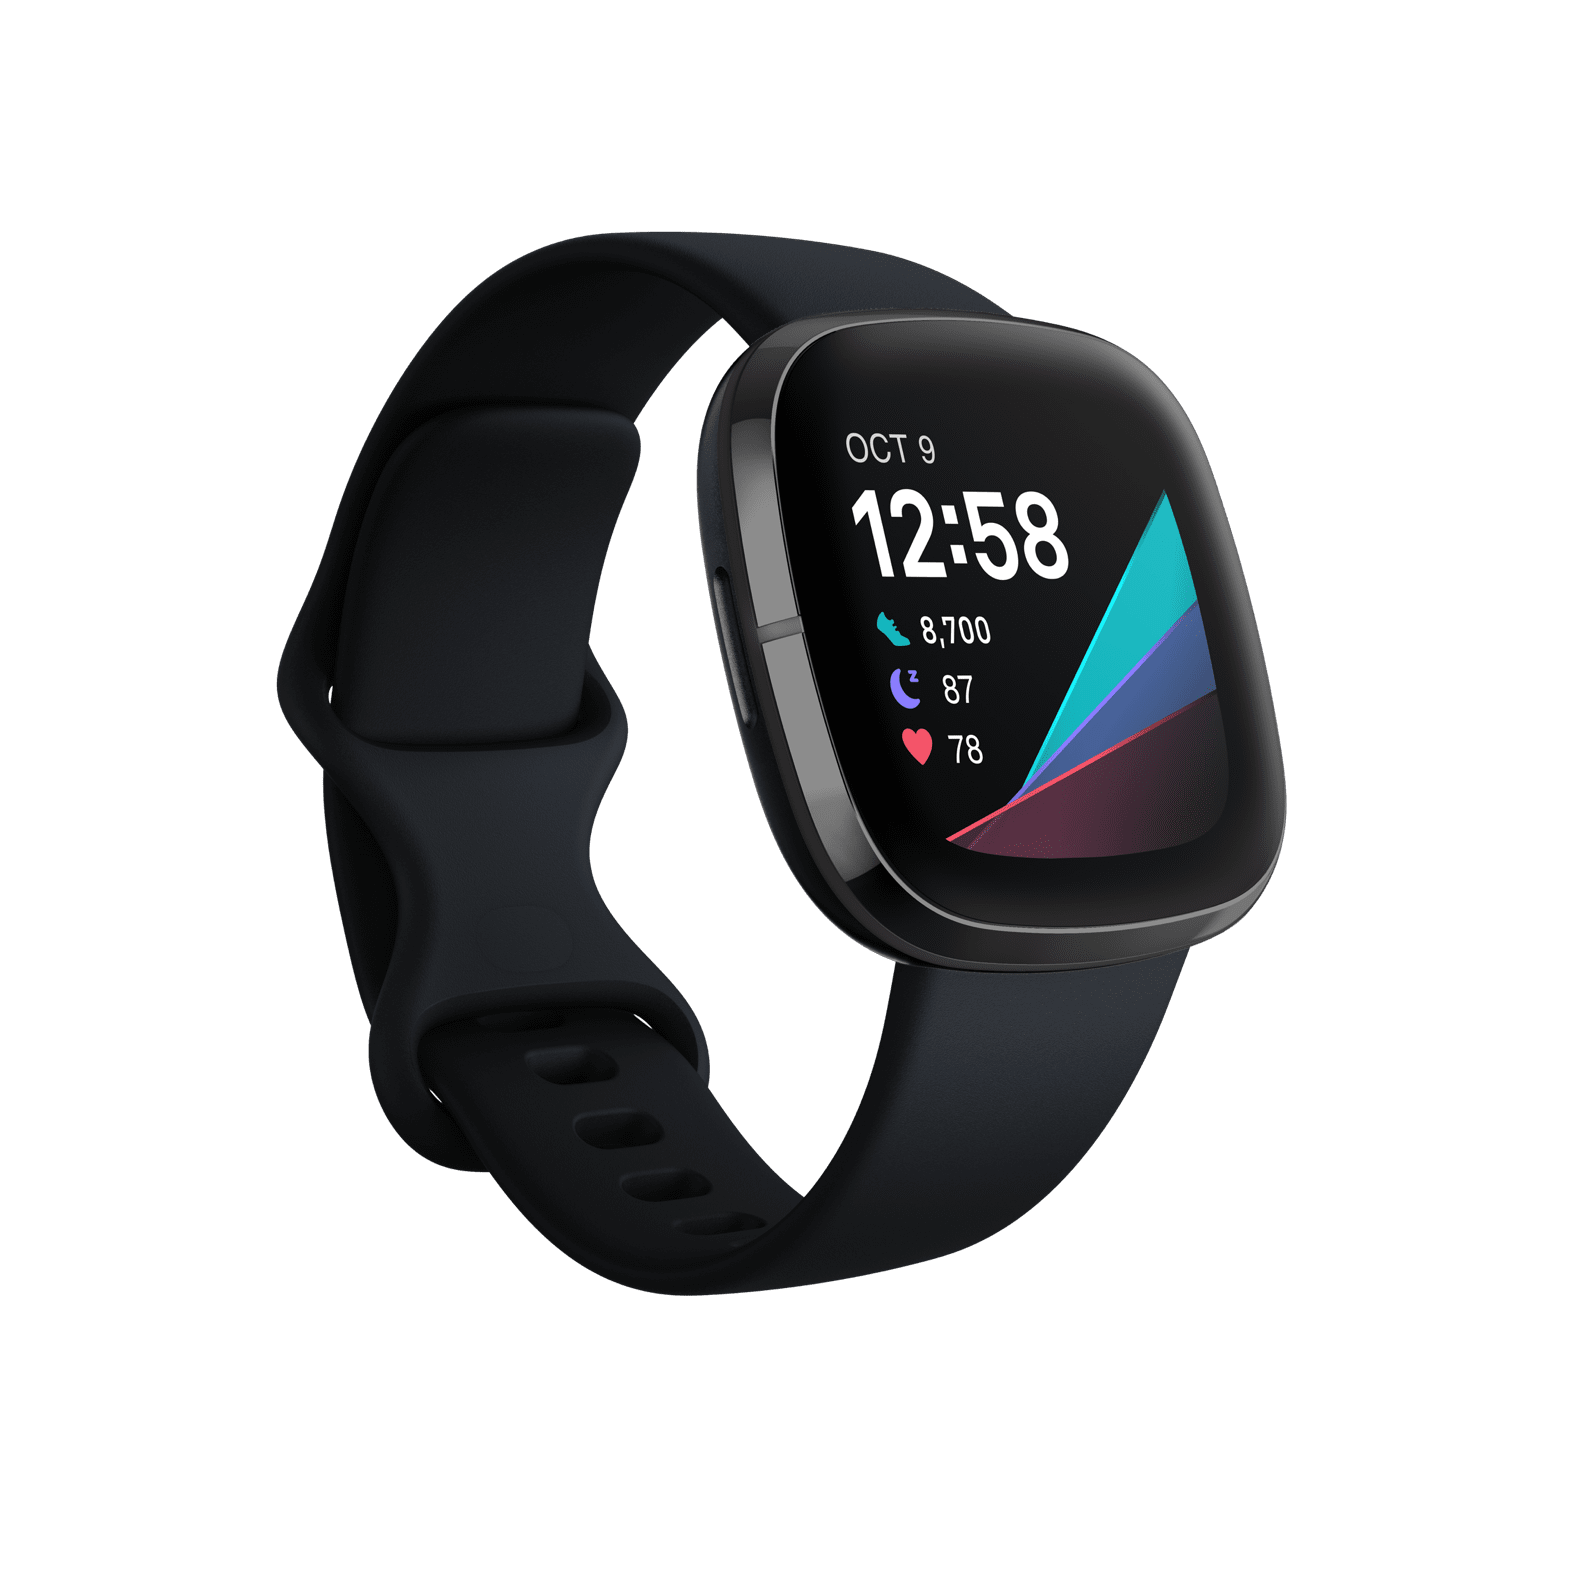 fitbit new products 2020